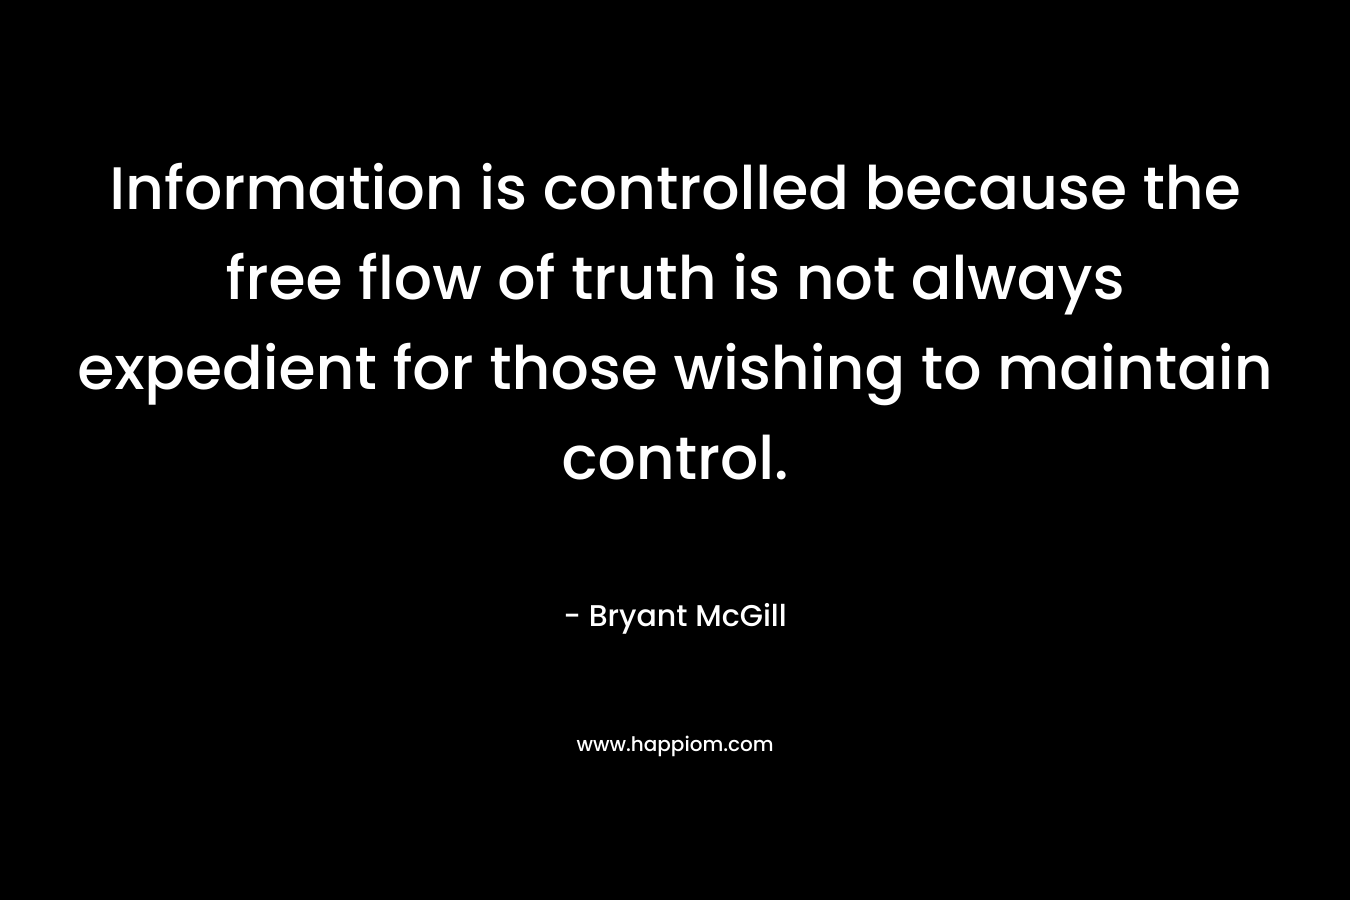 Information is controlled because the free flow of truth is not always expedient for those wishing to maintain control. – Bryant McGill